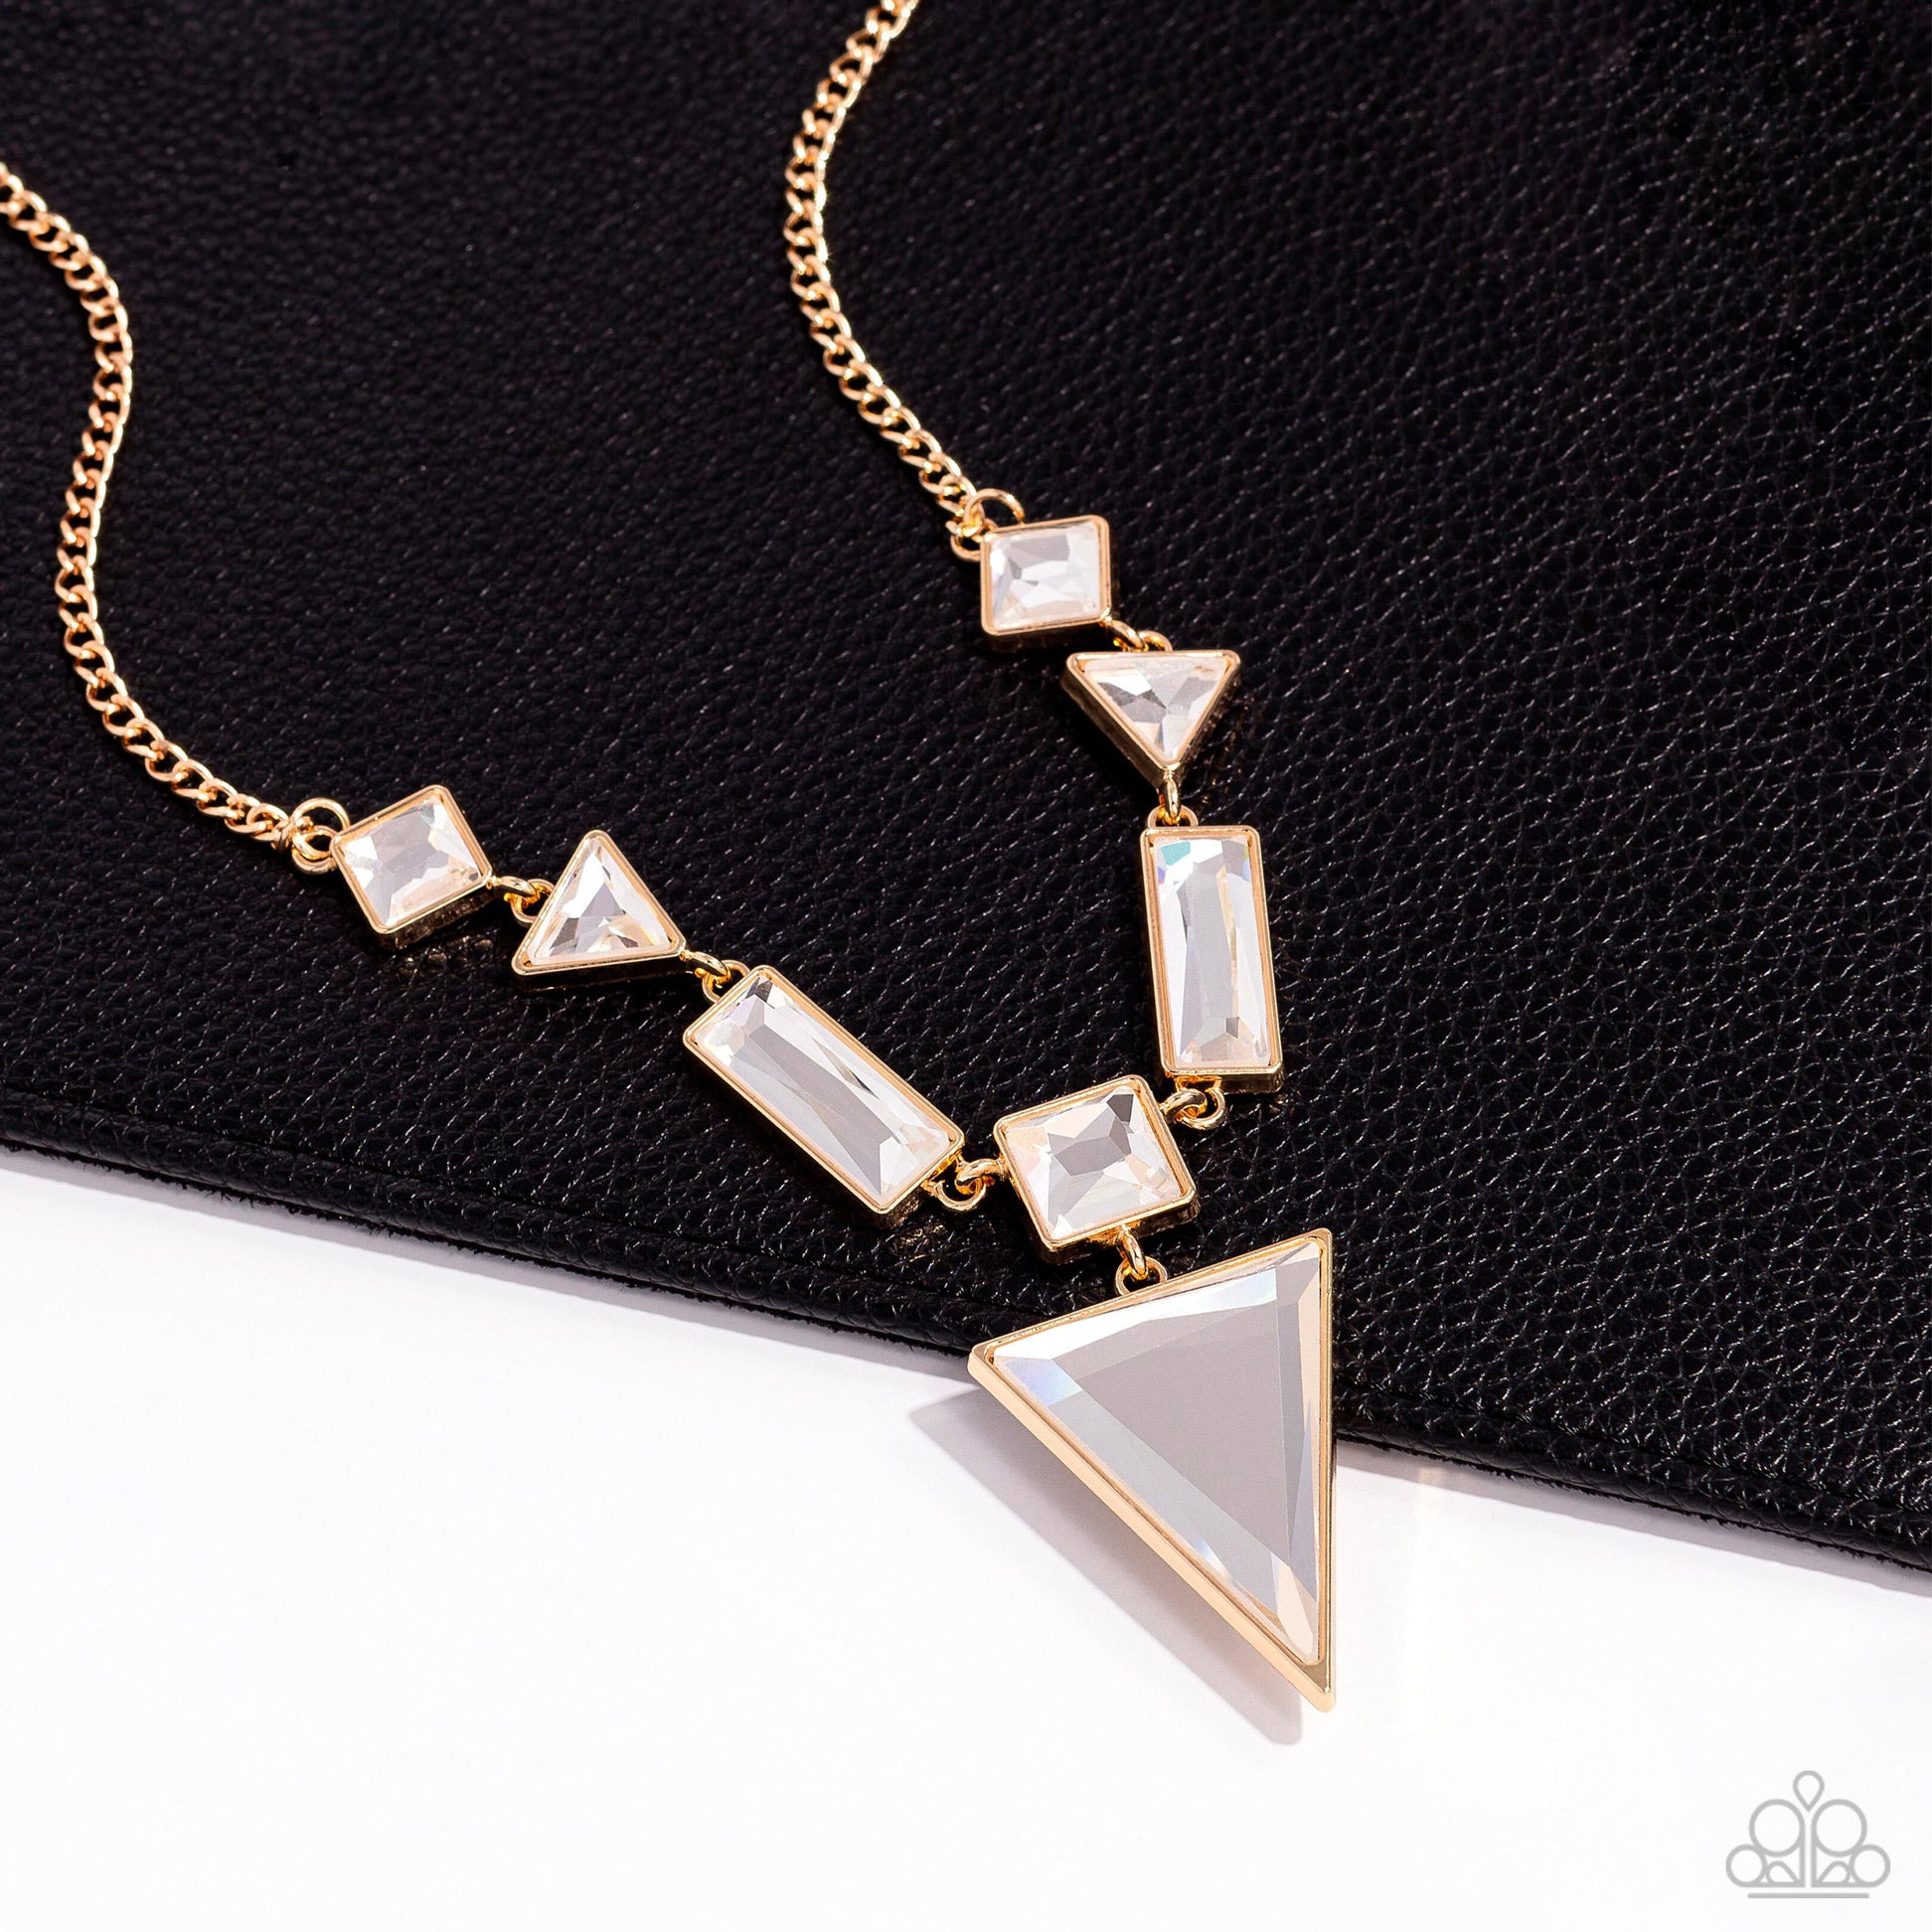 Paparazzi Accessories Fetchingly Fierce - Gold An array of glassy white gems are chiseled into geometric shapes and pressed into shimmery gold frames. The angular display falls to a dramatic point at the center, where a square-cut gem anchors an upside-do